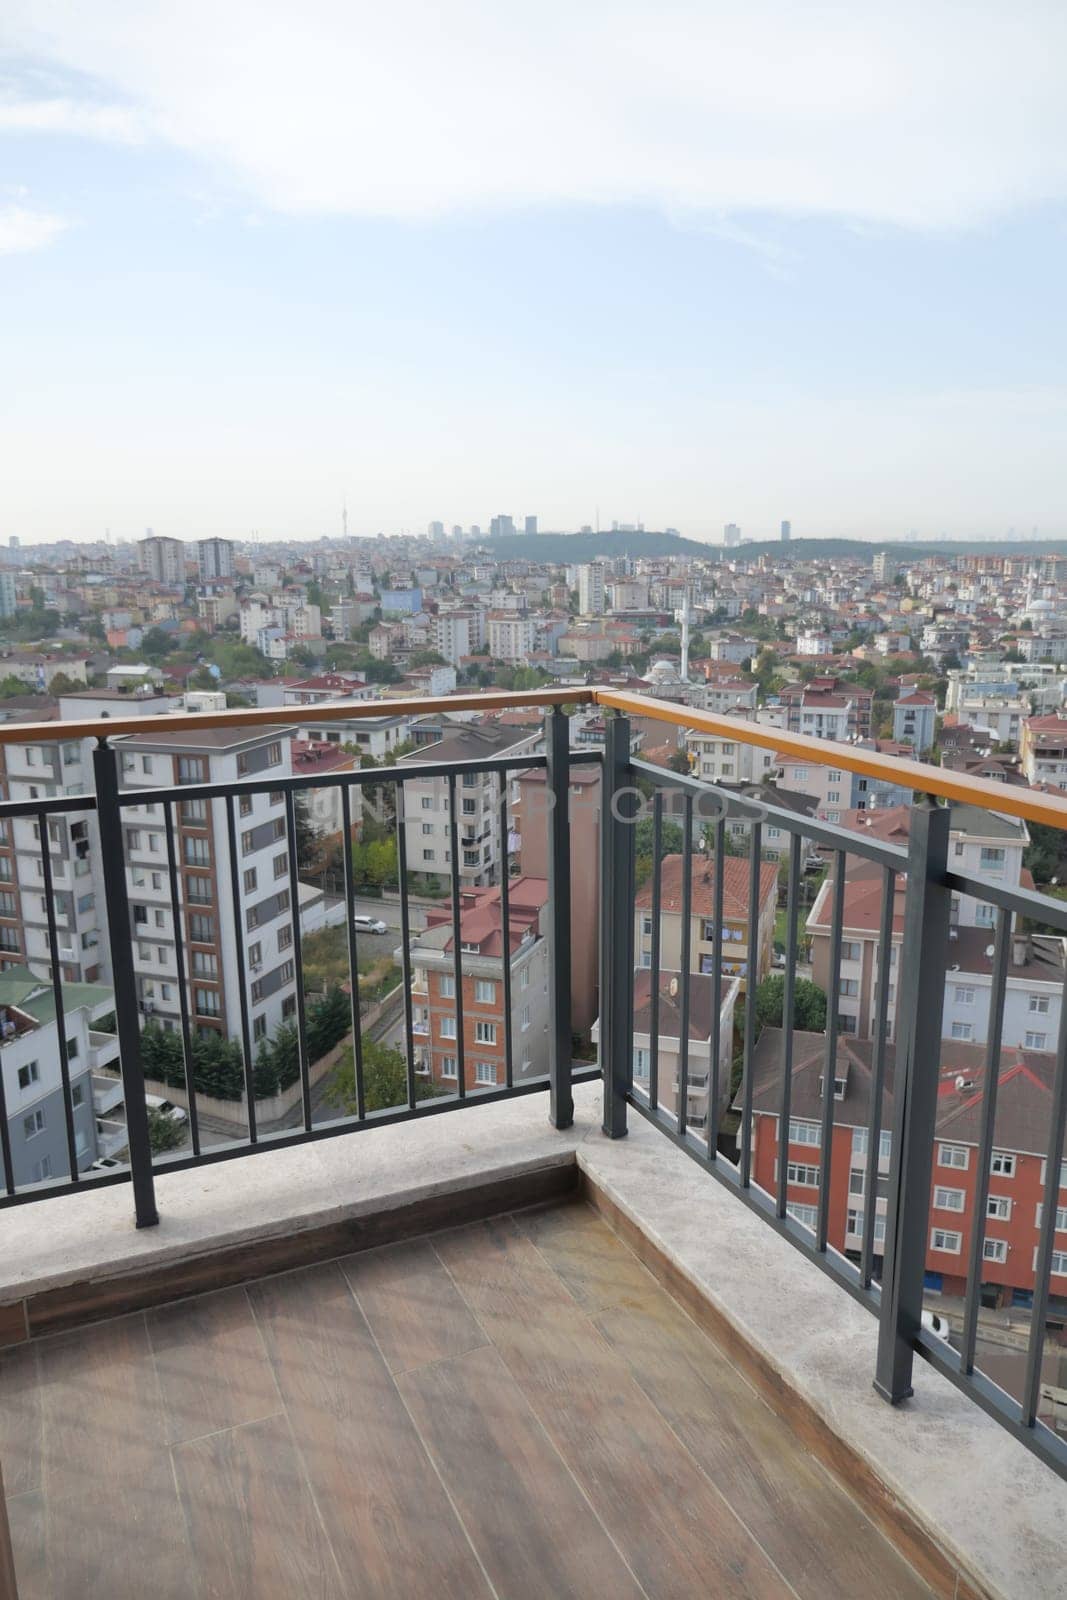 long Apartment balcony in istanbul city , by towfiq007